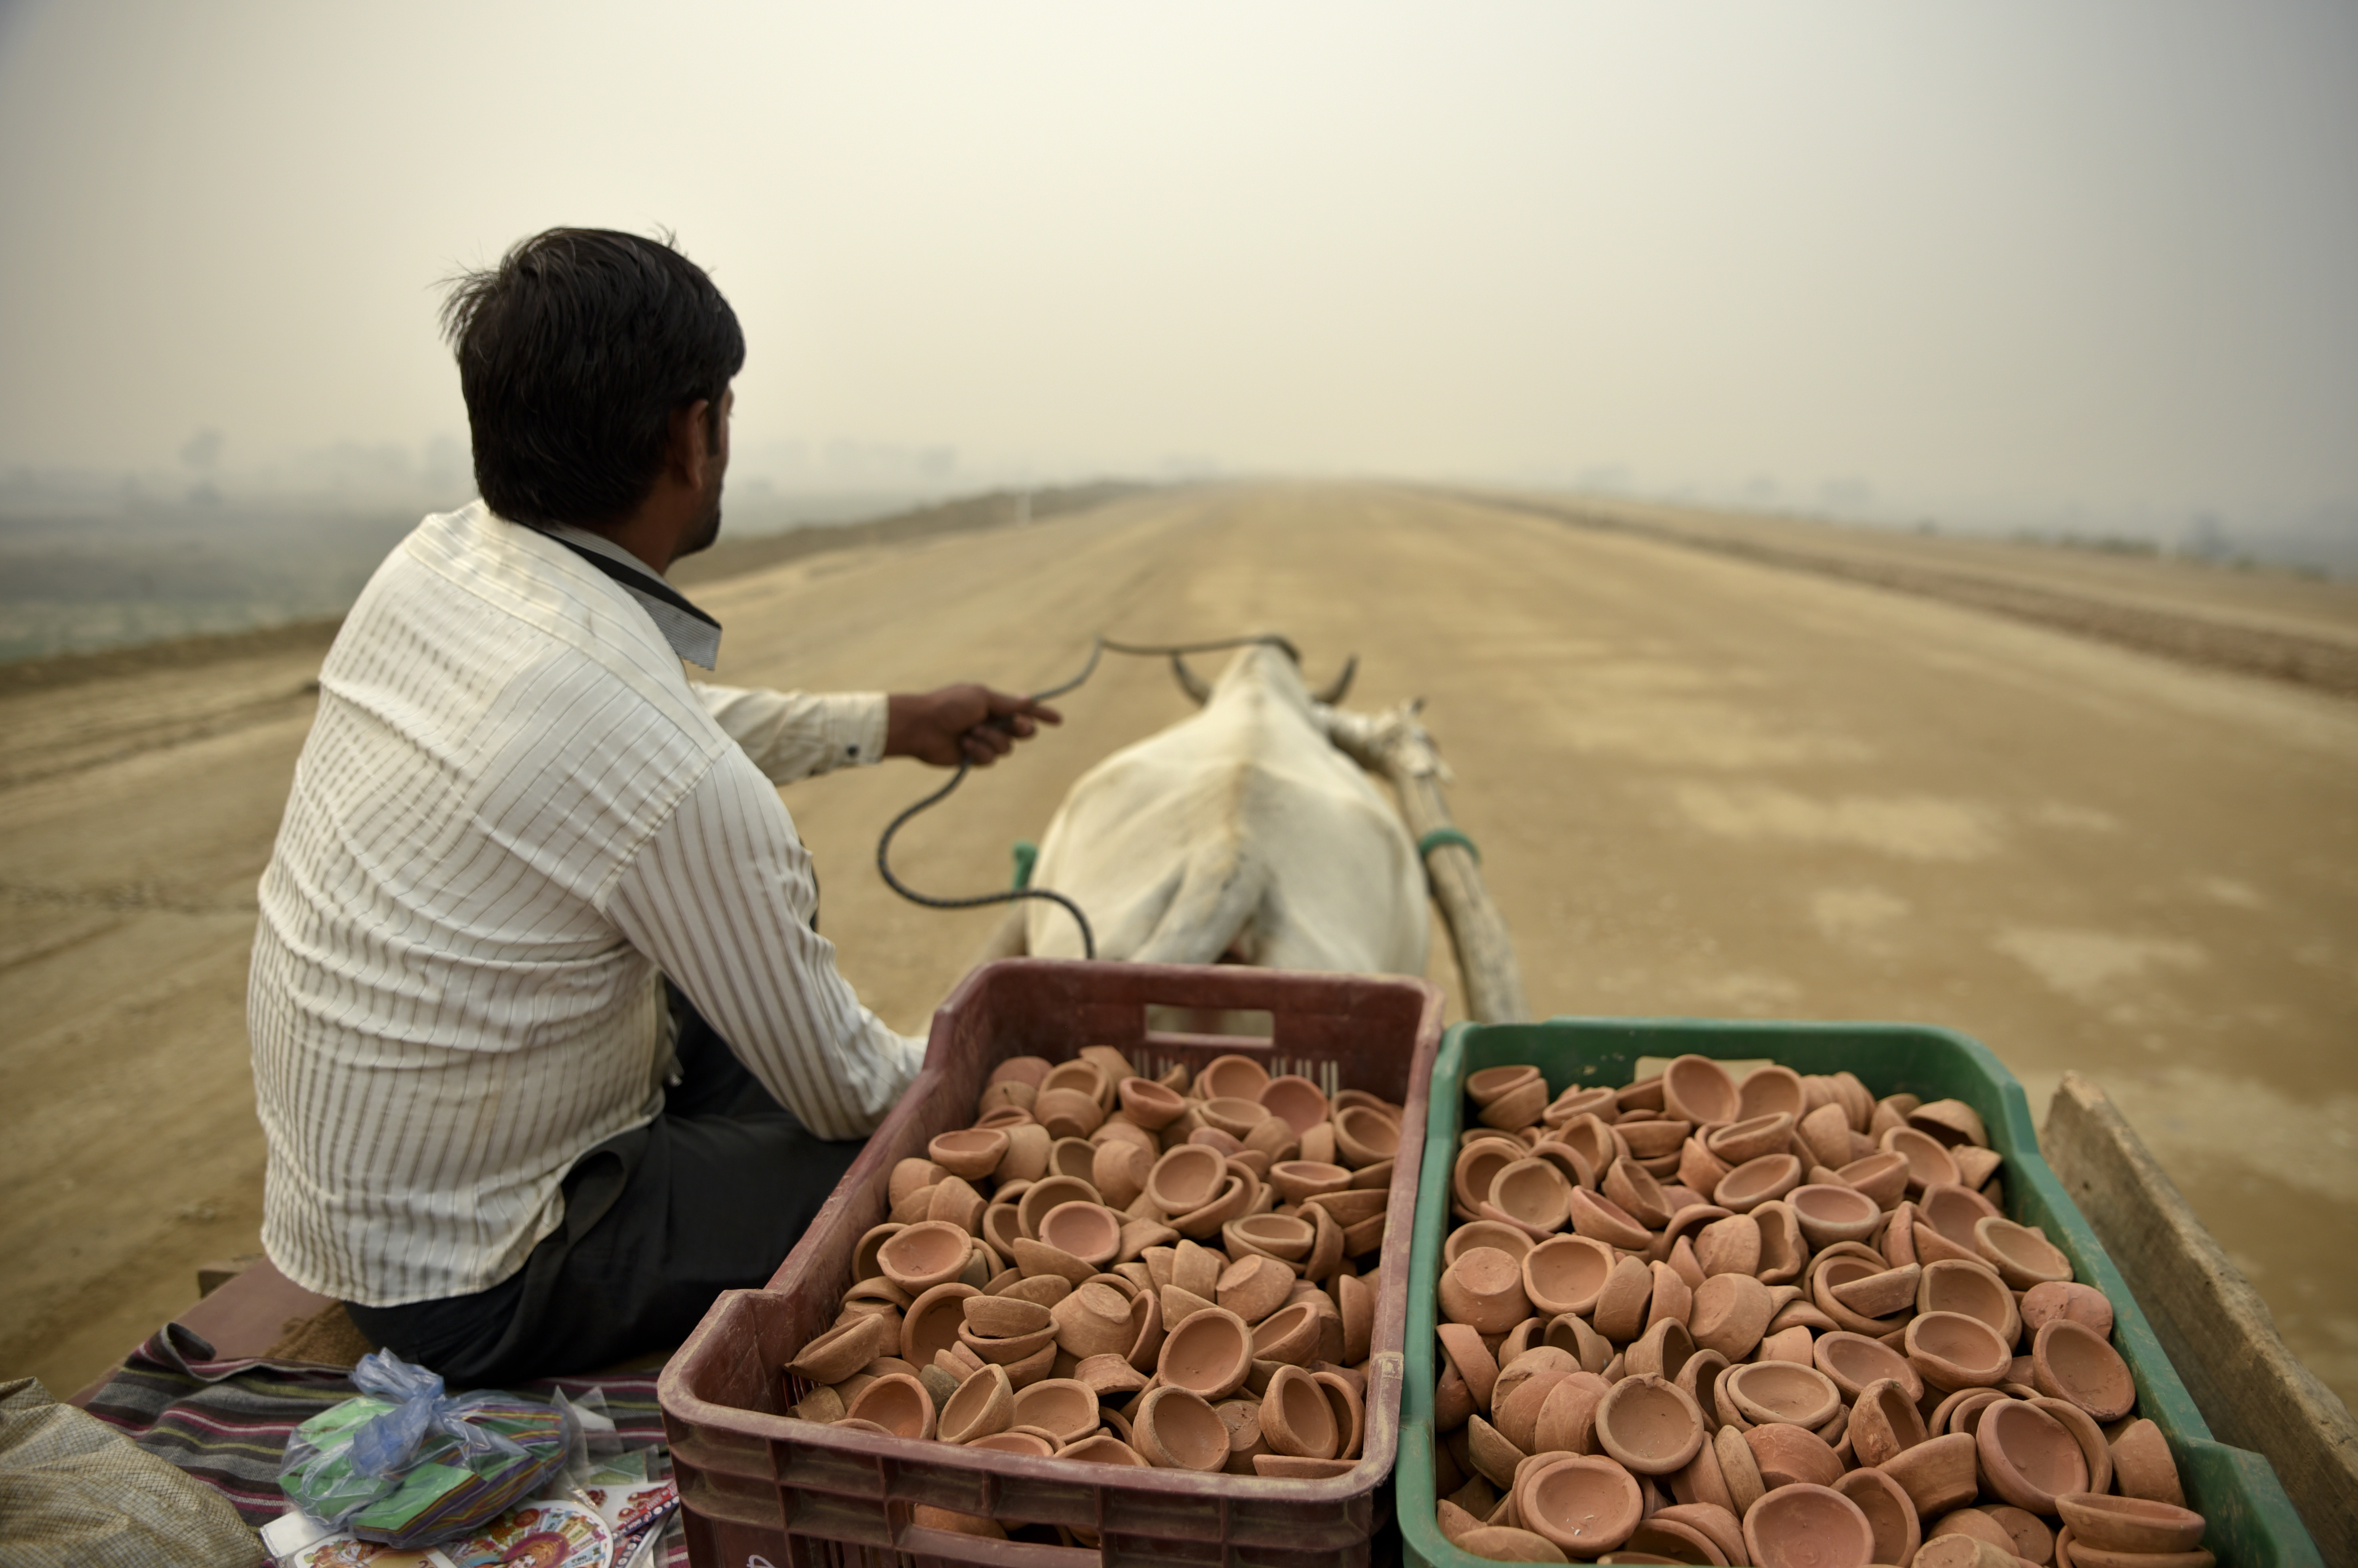 A man selling traditional earthen lamps ahead of Diwali festival, rides a bullock cart through an under construction road on a foggy day in Greater Noida, near New Delhi - AP